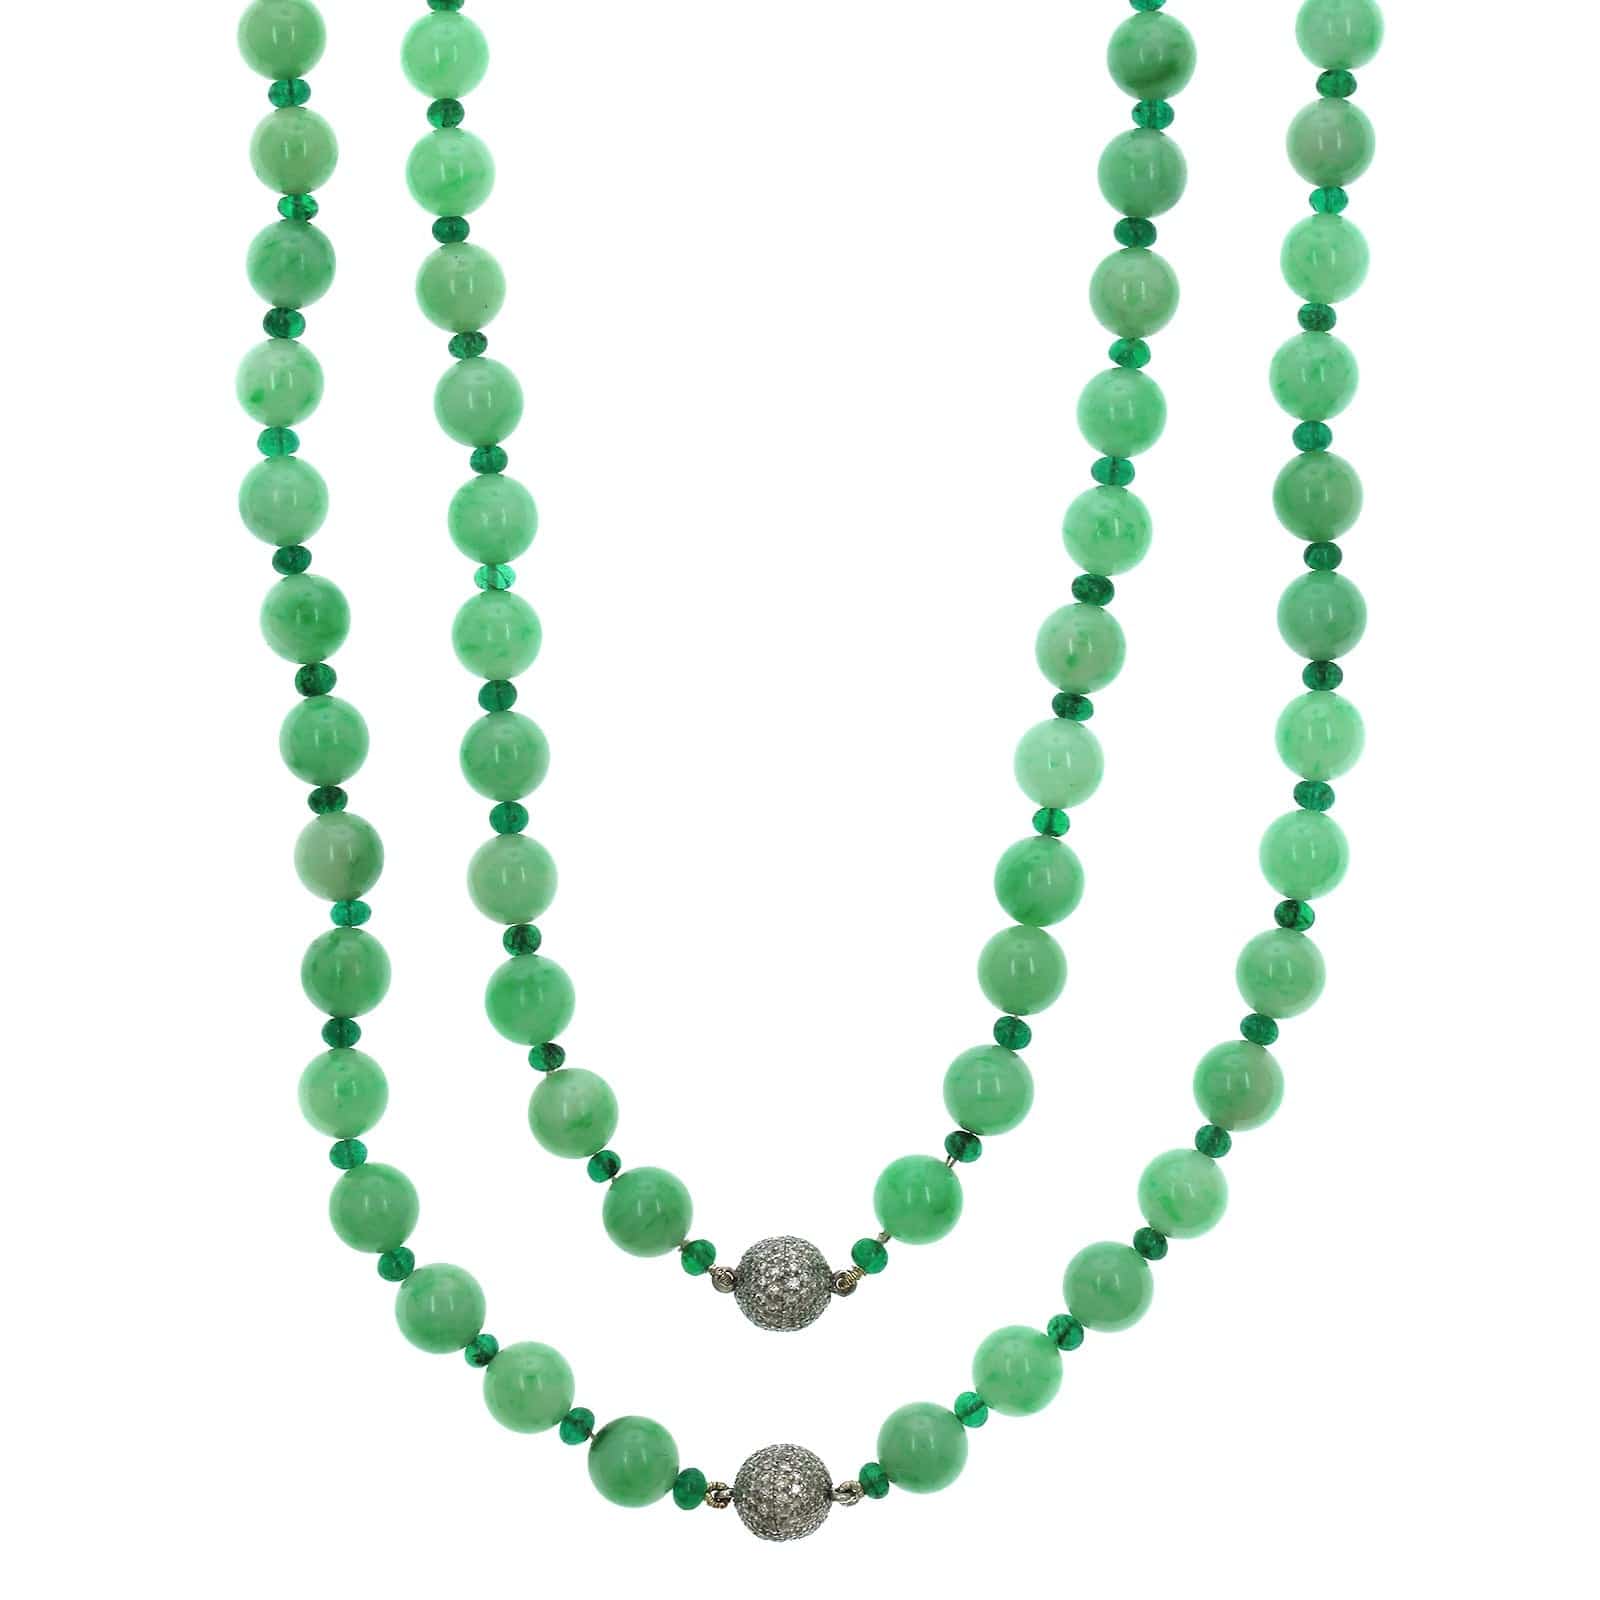 18K White Gold Jade and Emerald Bead Necklace, 18k white gold, Long's Jewelers